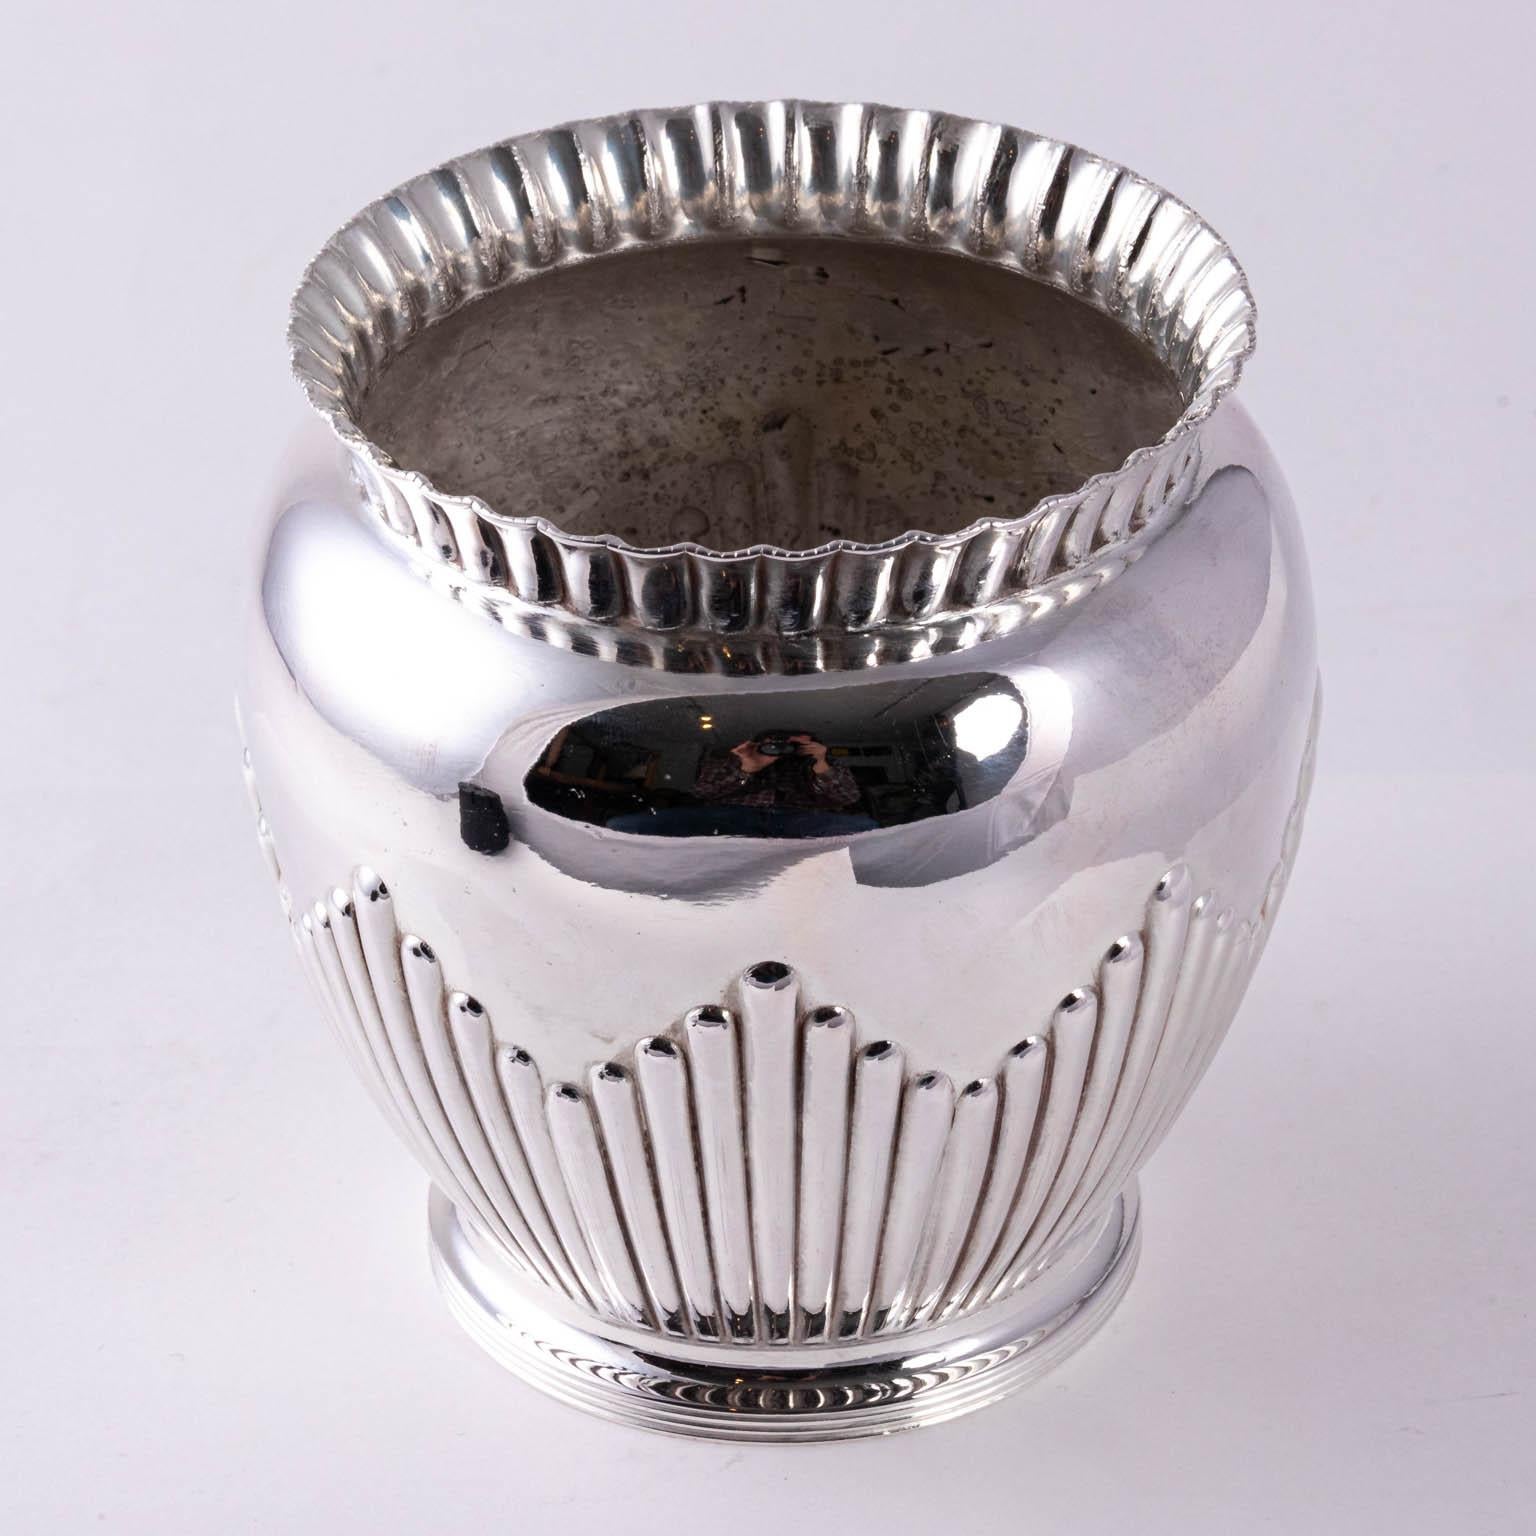 Silver plate Art Deco cachepot by Walker and hall, circa 1930s. Made in England. Please note of wear consistent with age.